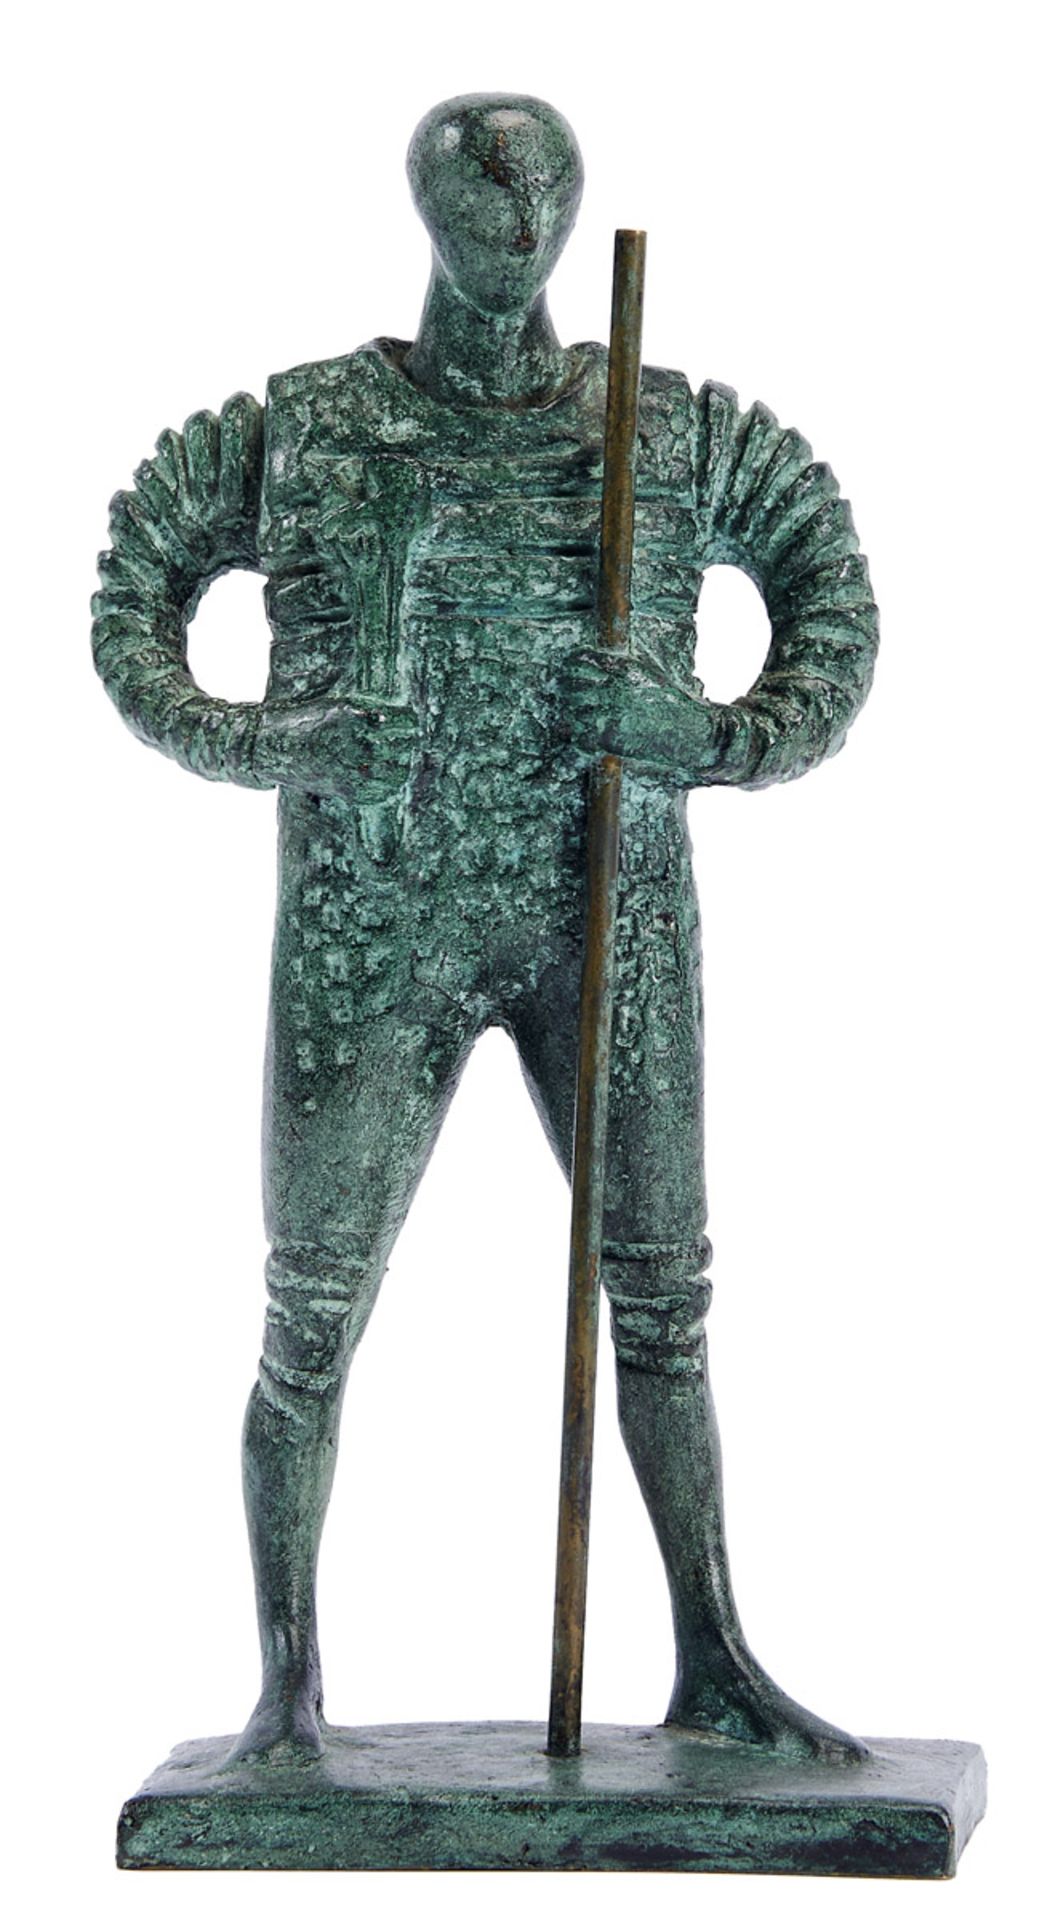 Male figure, patinated bronze sculpture, signed with initials "CM", numbered 254/300, Dim. - 26,5